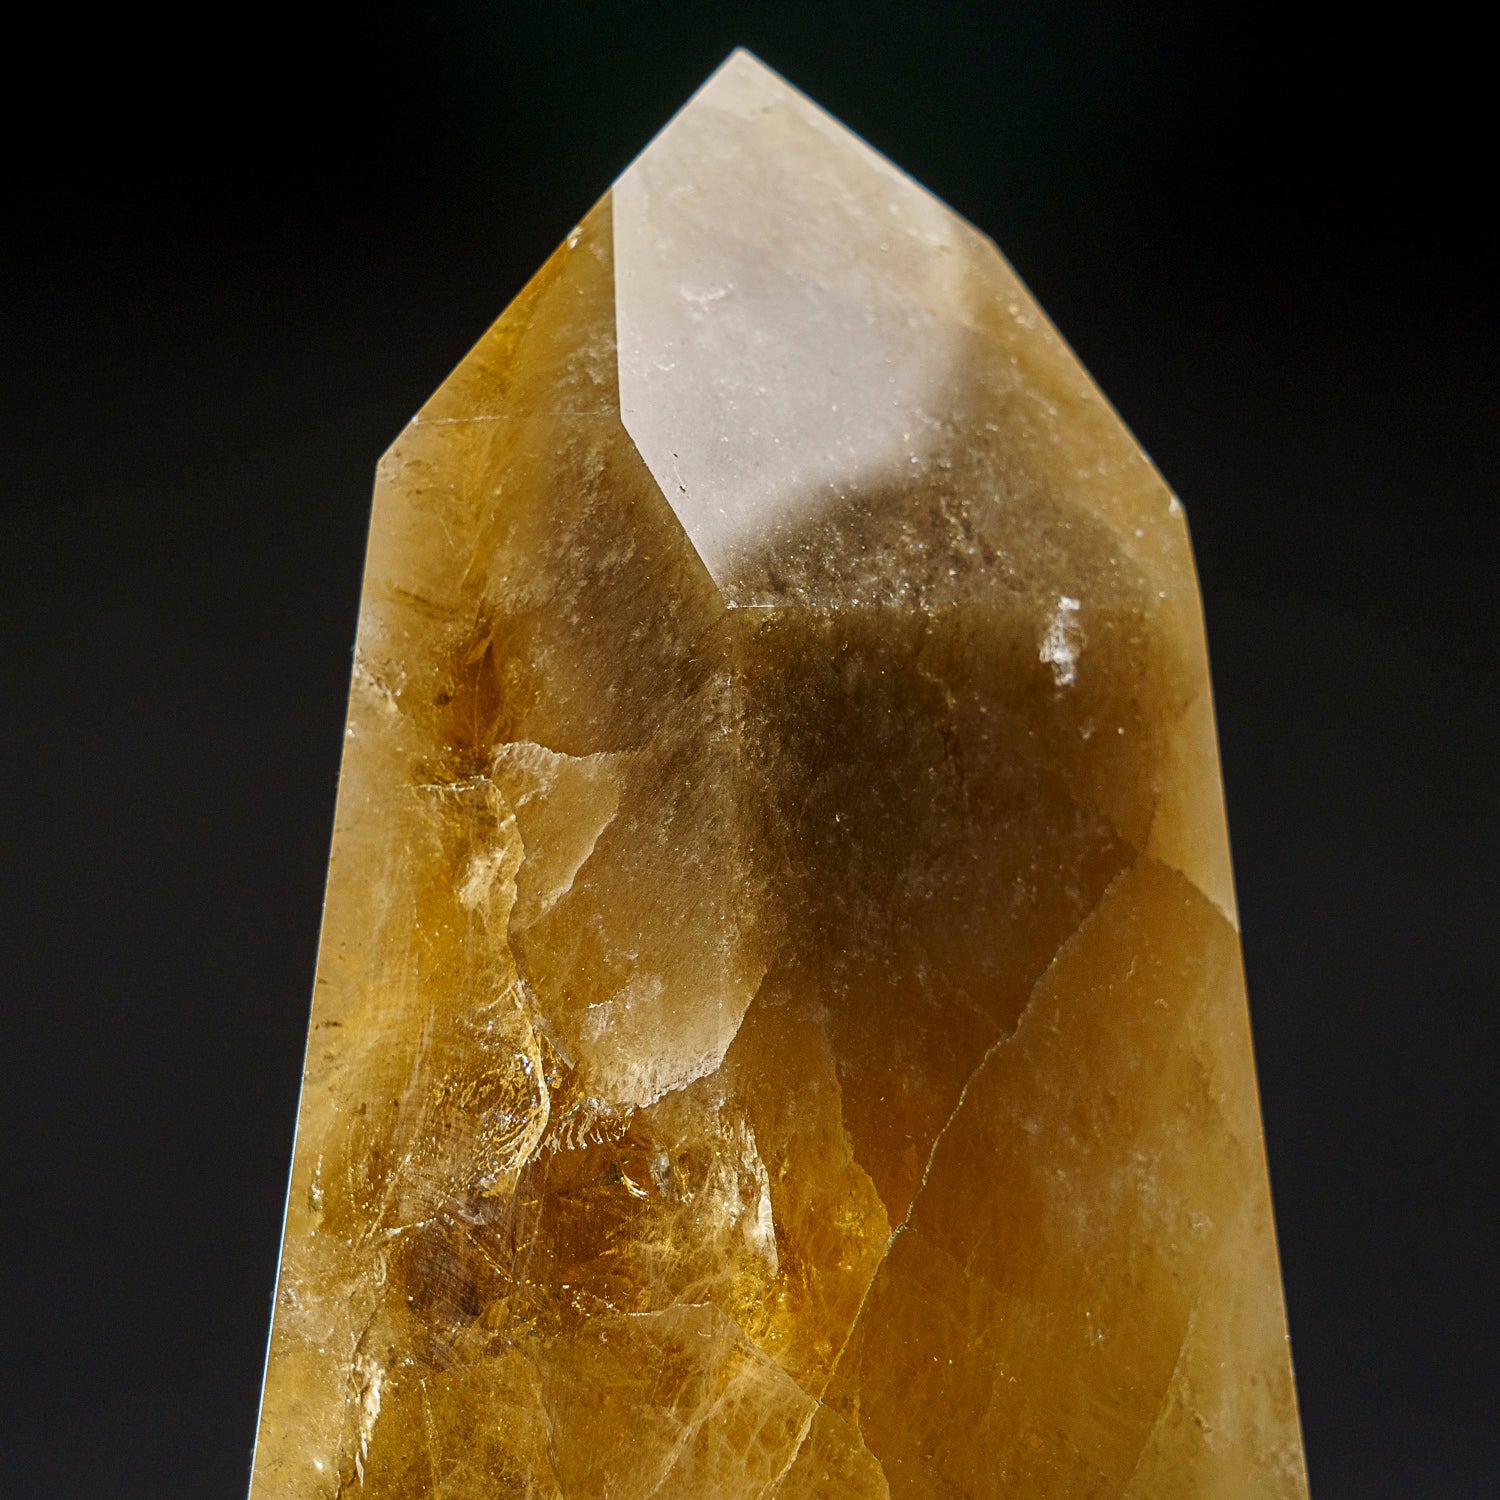 Genuine Museum Quality Citrine Crystal Point from Brazil (8.5 lbs)